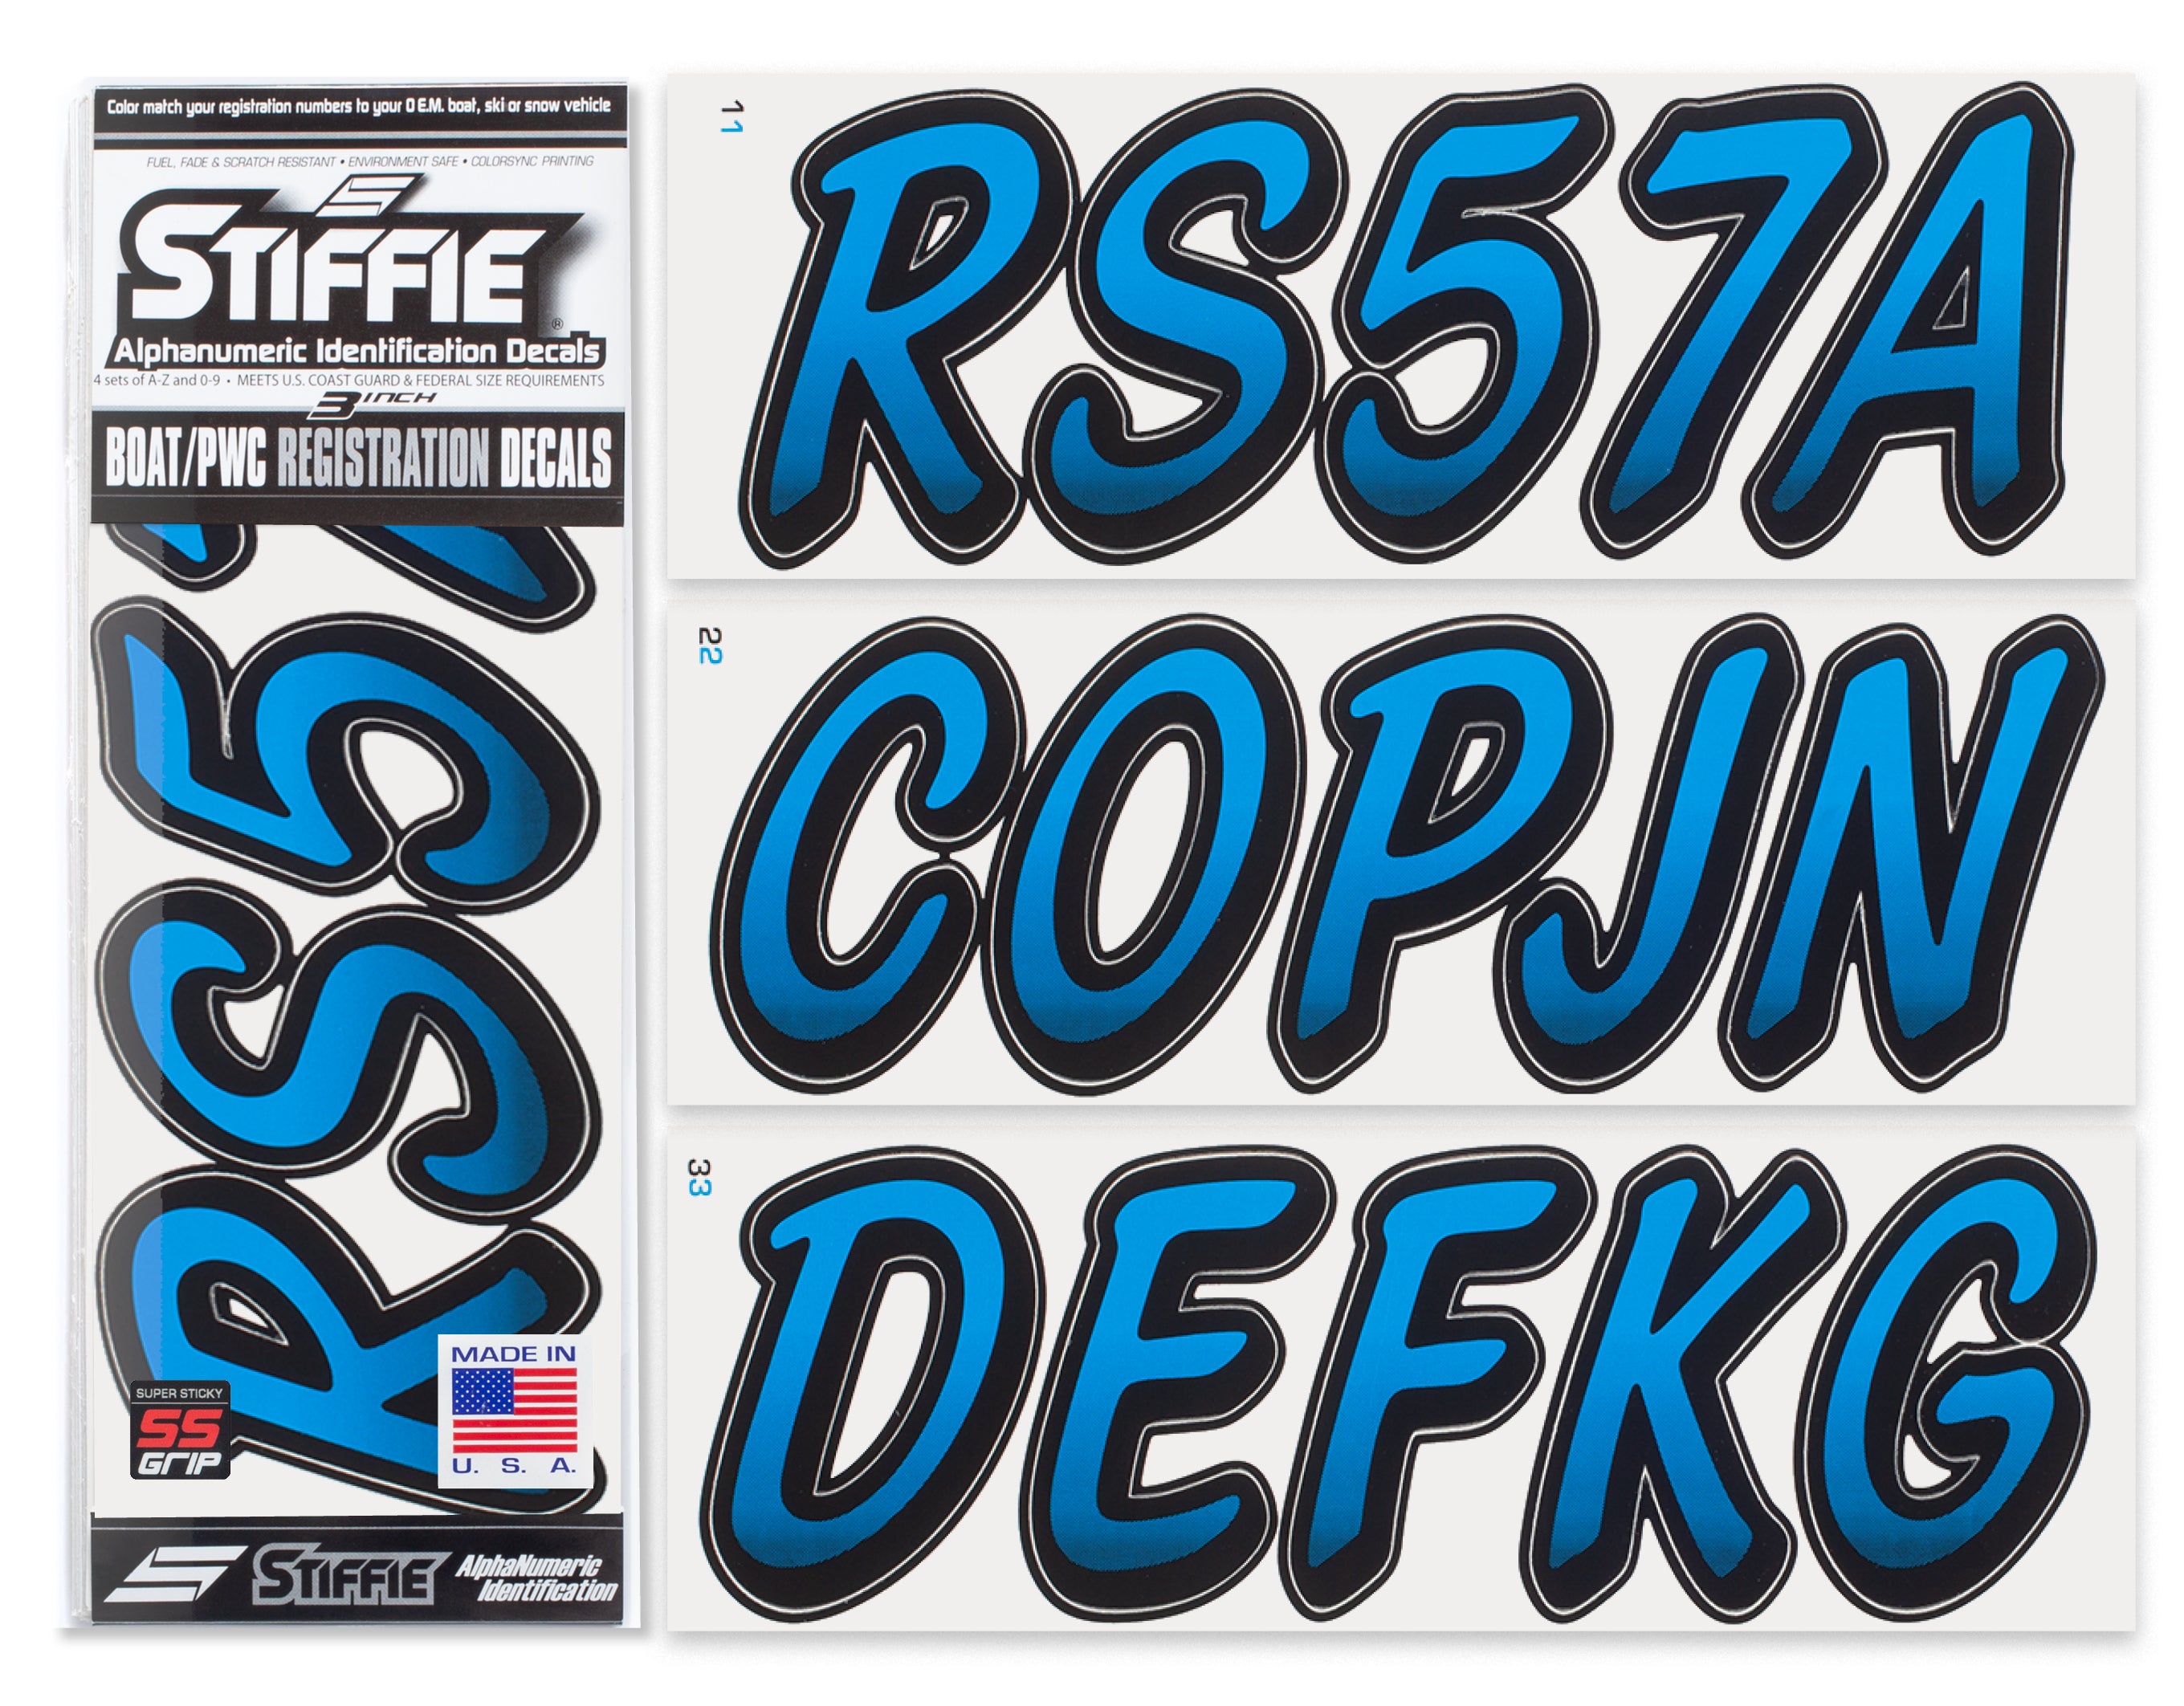 STIFFIE Whipline Blueberry/Black Super Sticky 3" Alpha Numeric Registration Identification Numbers Stickers Decals for Sea-Doo Spark, Inflatable Boats, Ribs, Hypalon/PVC, PWC and Boats.